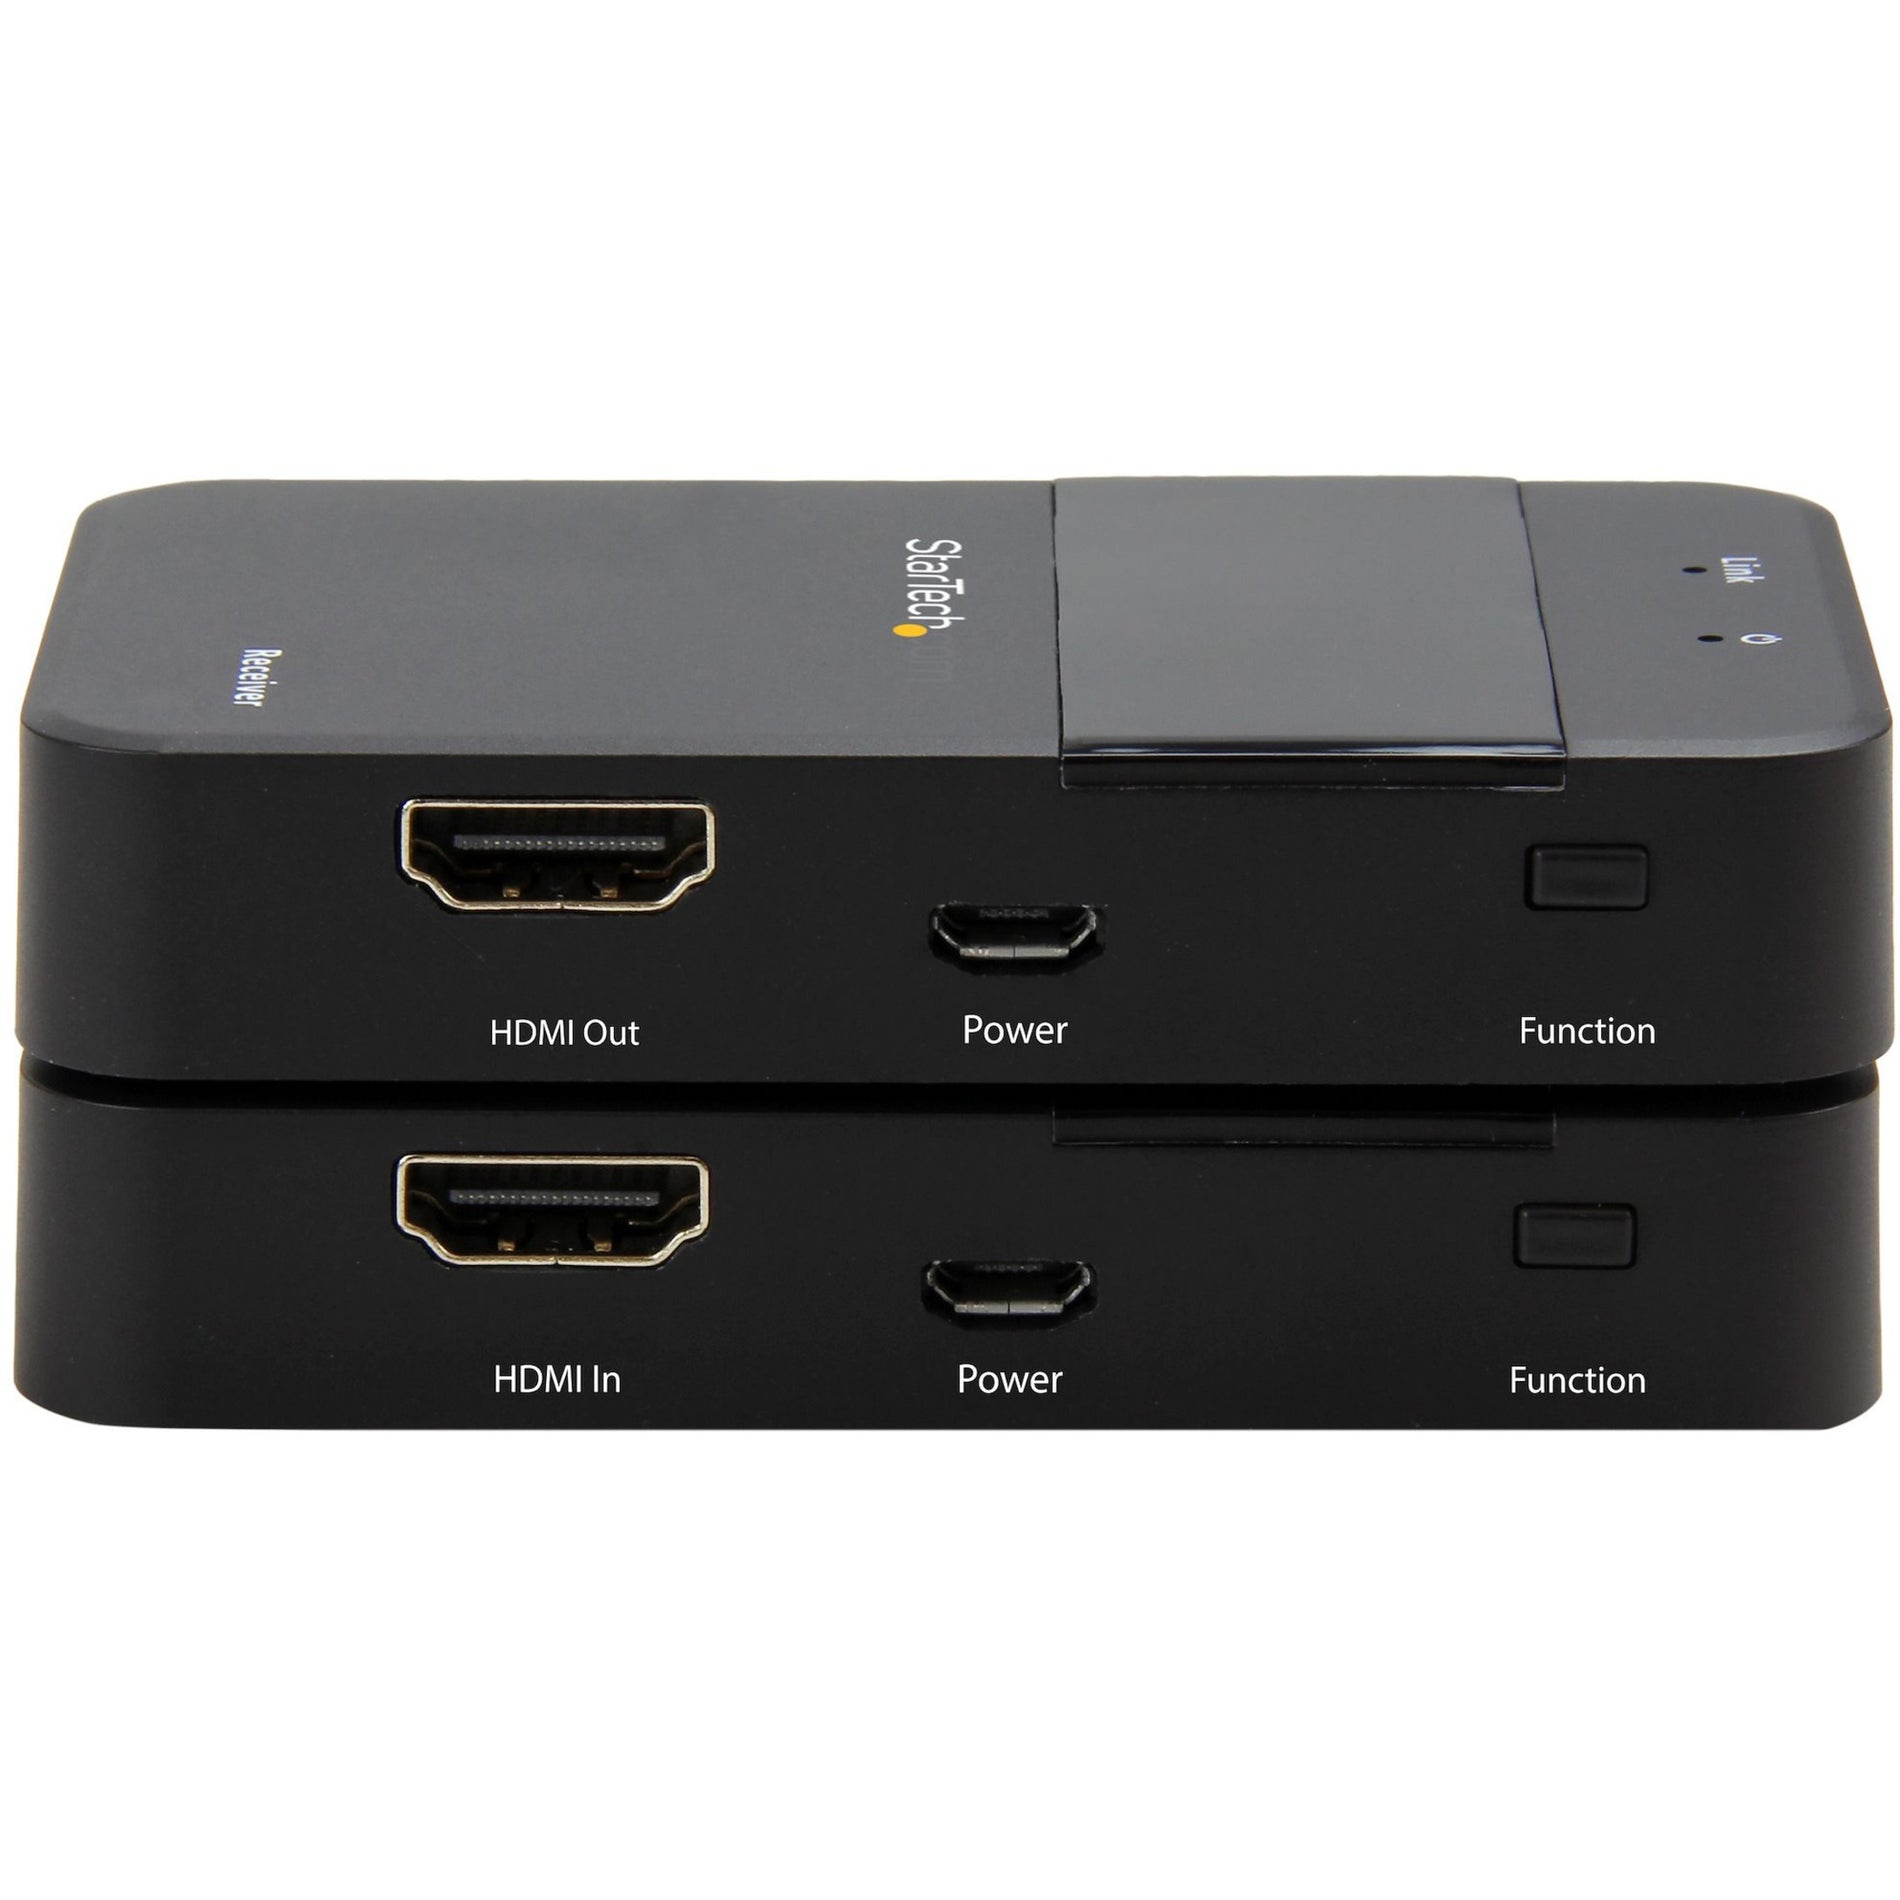 StarTech.com ST121WHDS HDMI over Wireless Extender - 65 ft. (20 m) - 1080p, Full HD Video Transmission